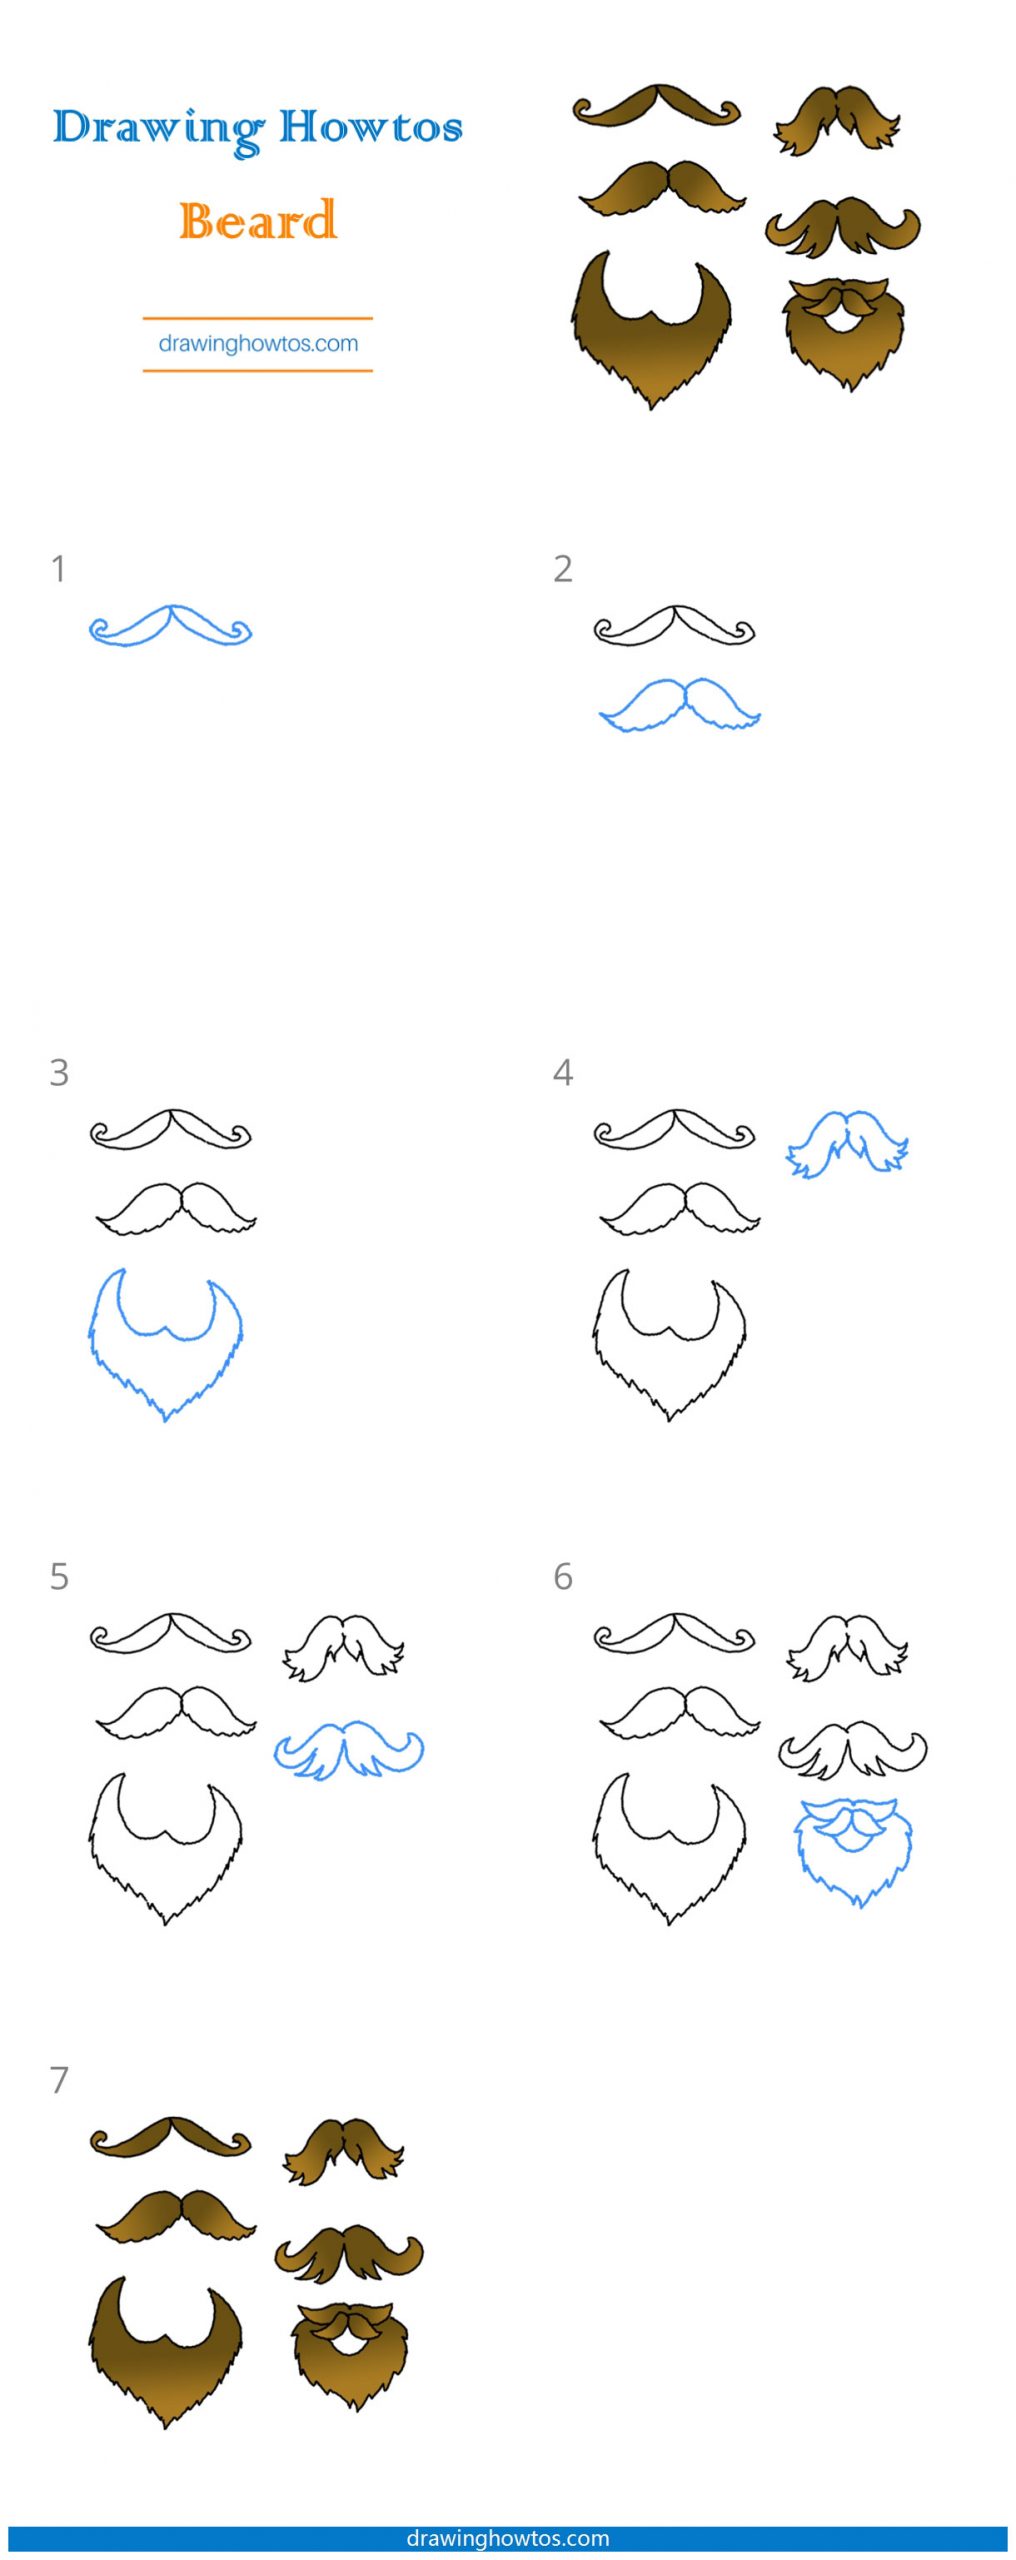 How to Draw Beards Step by Step